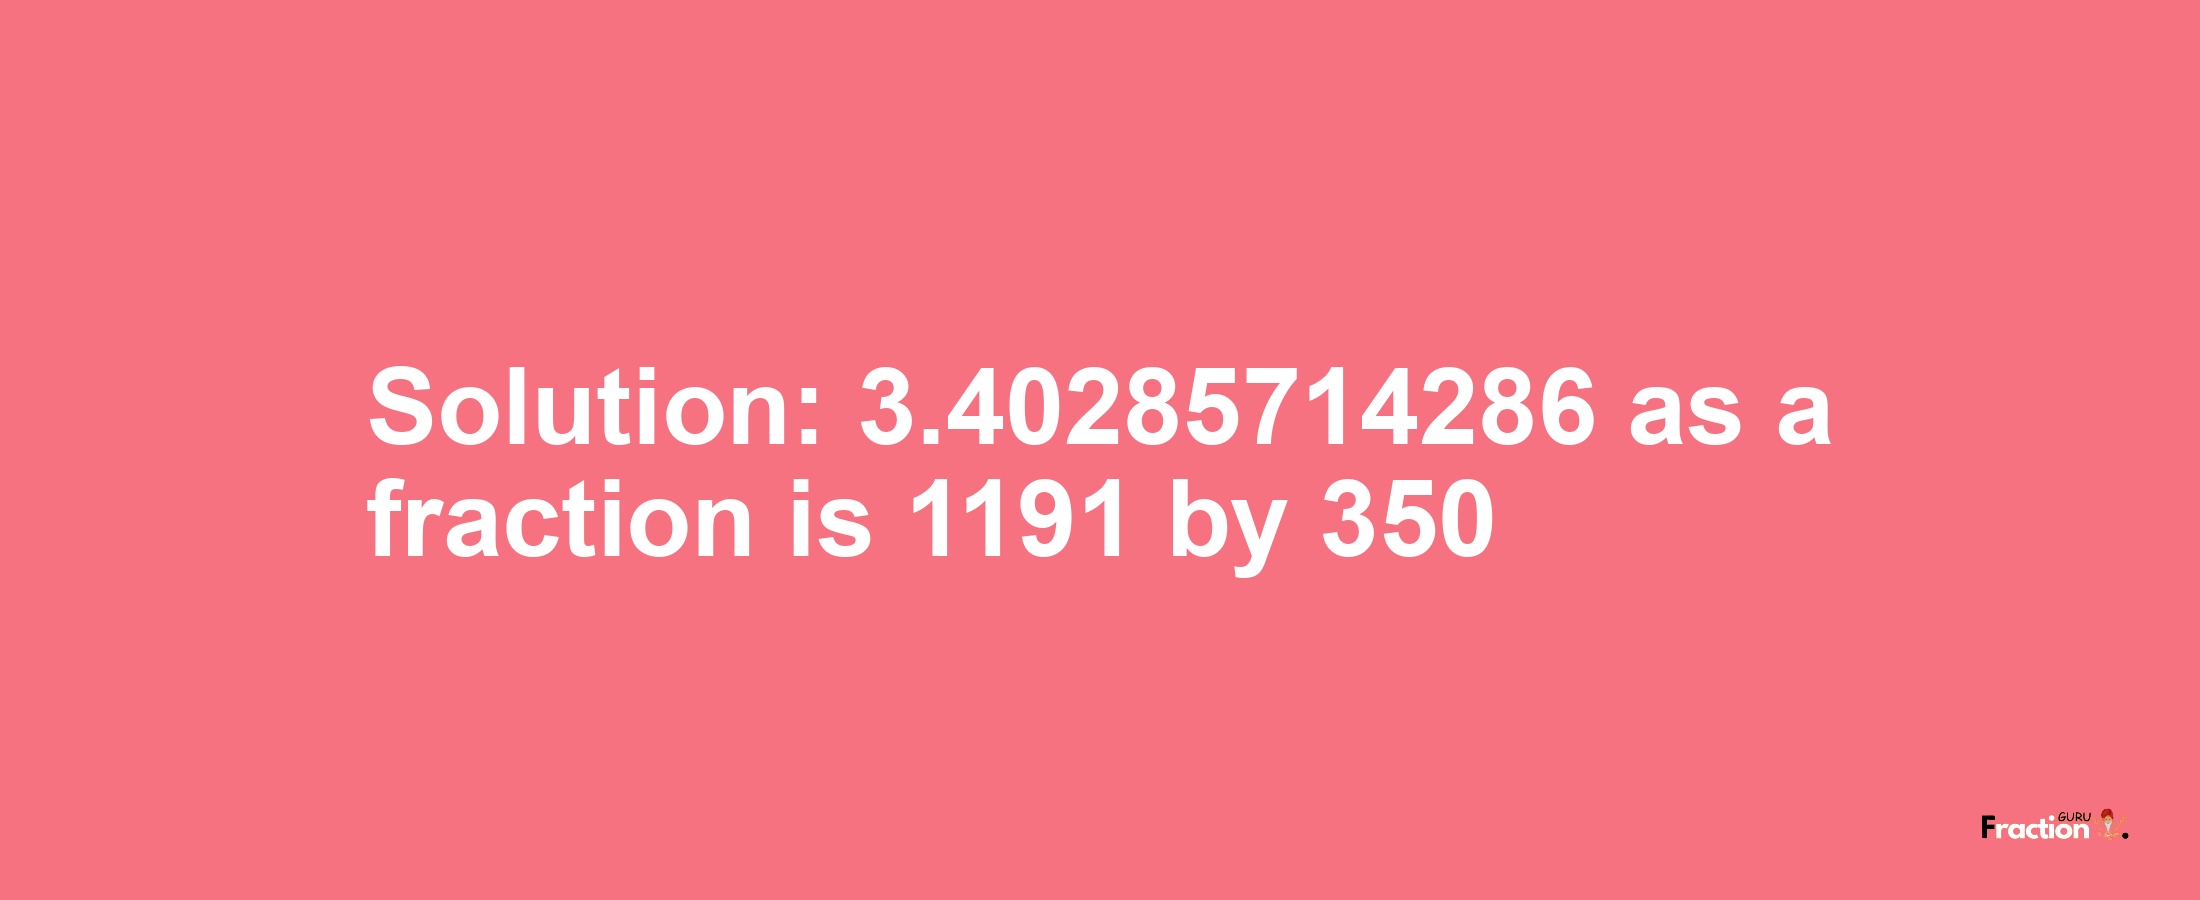 Solution:3.40285714286 as a fraction is 1191/350